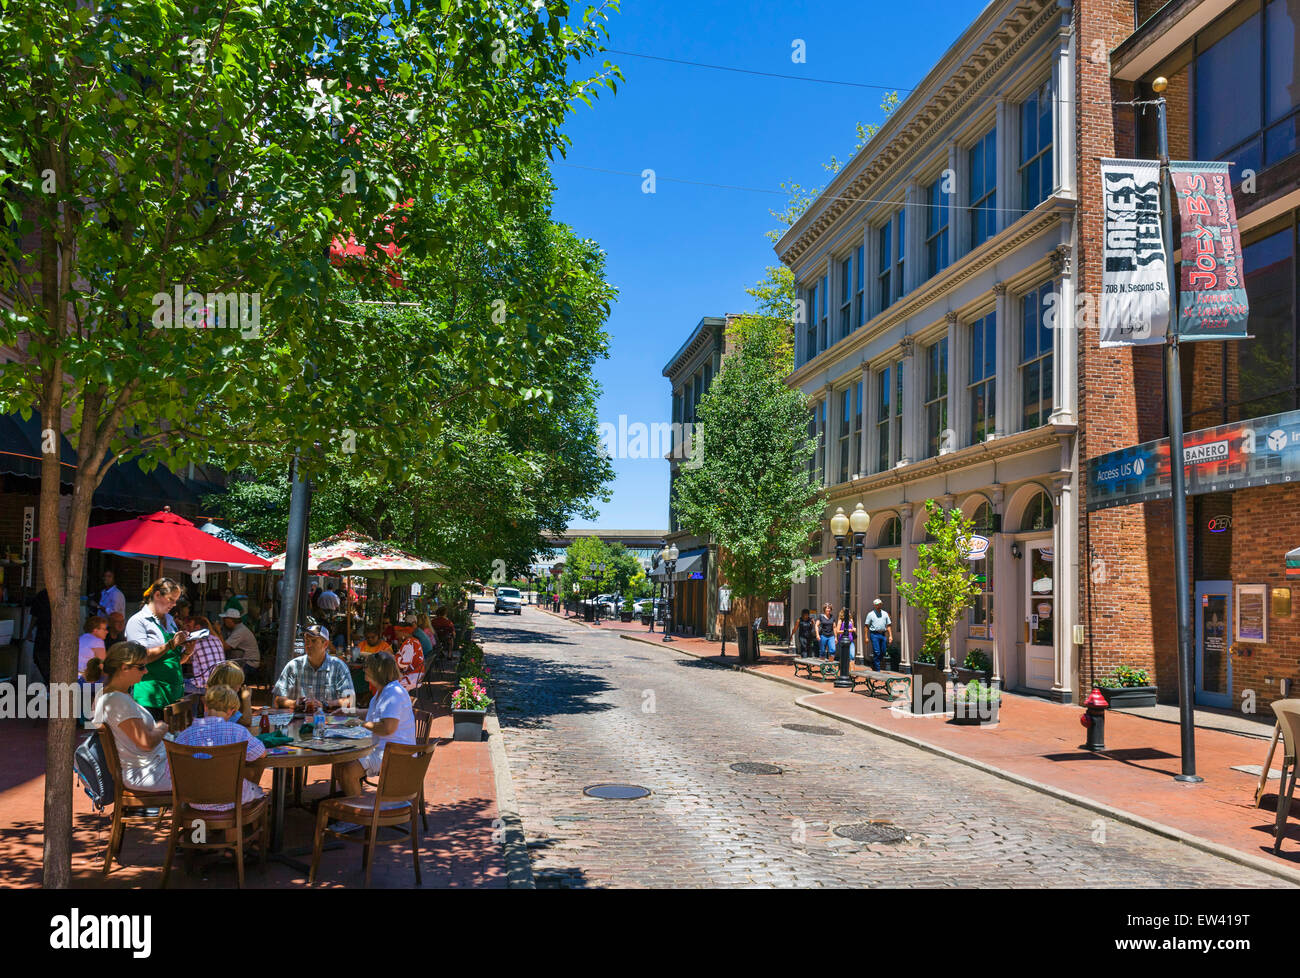 Shops and restaurants on North 2nd Street in Laclede's Landing on the historic riverfront, St Louis, Missouri, USA Stock Photo